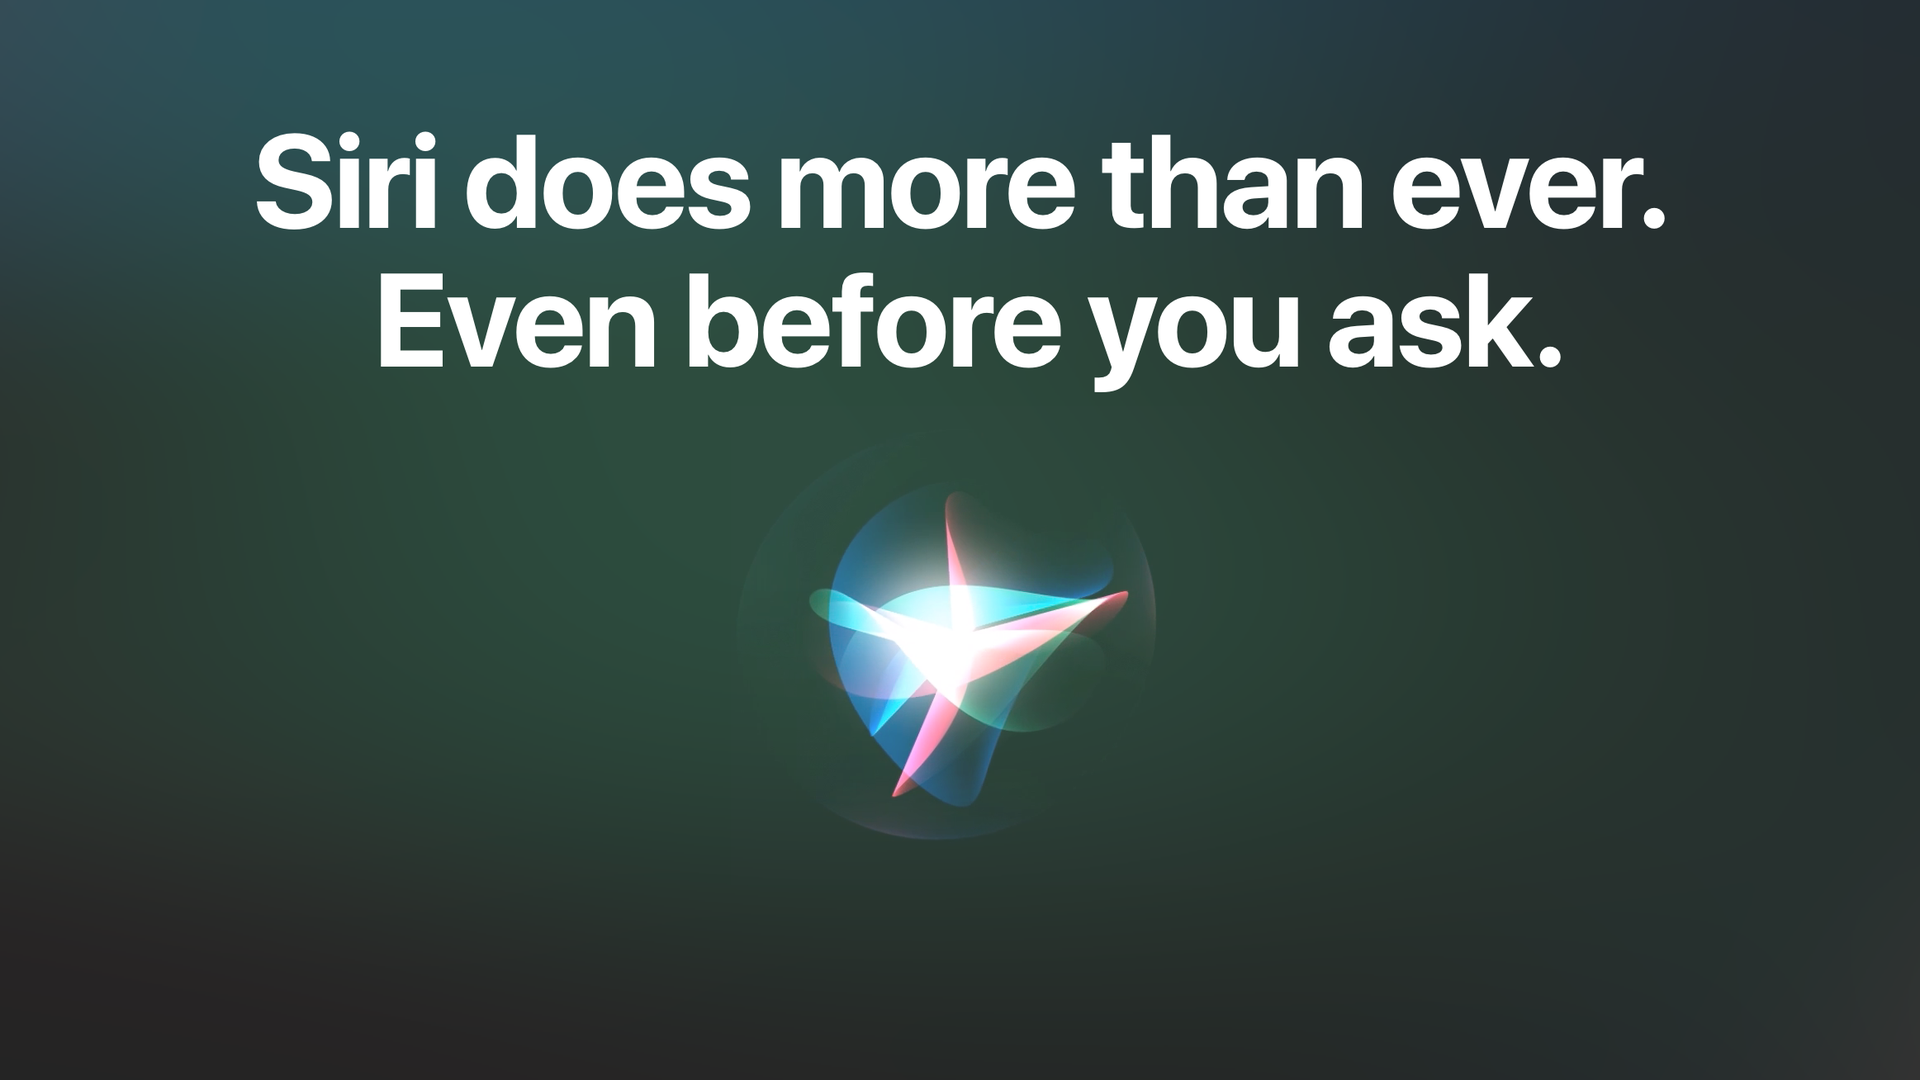 A promotional image for Siri that reads "Siri does more than ever. Even before you ask"